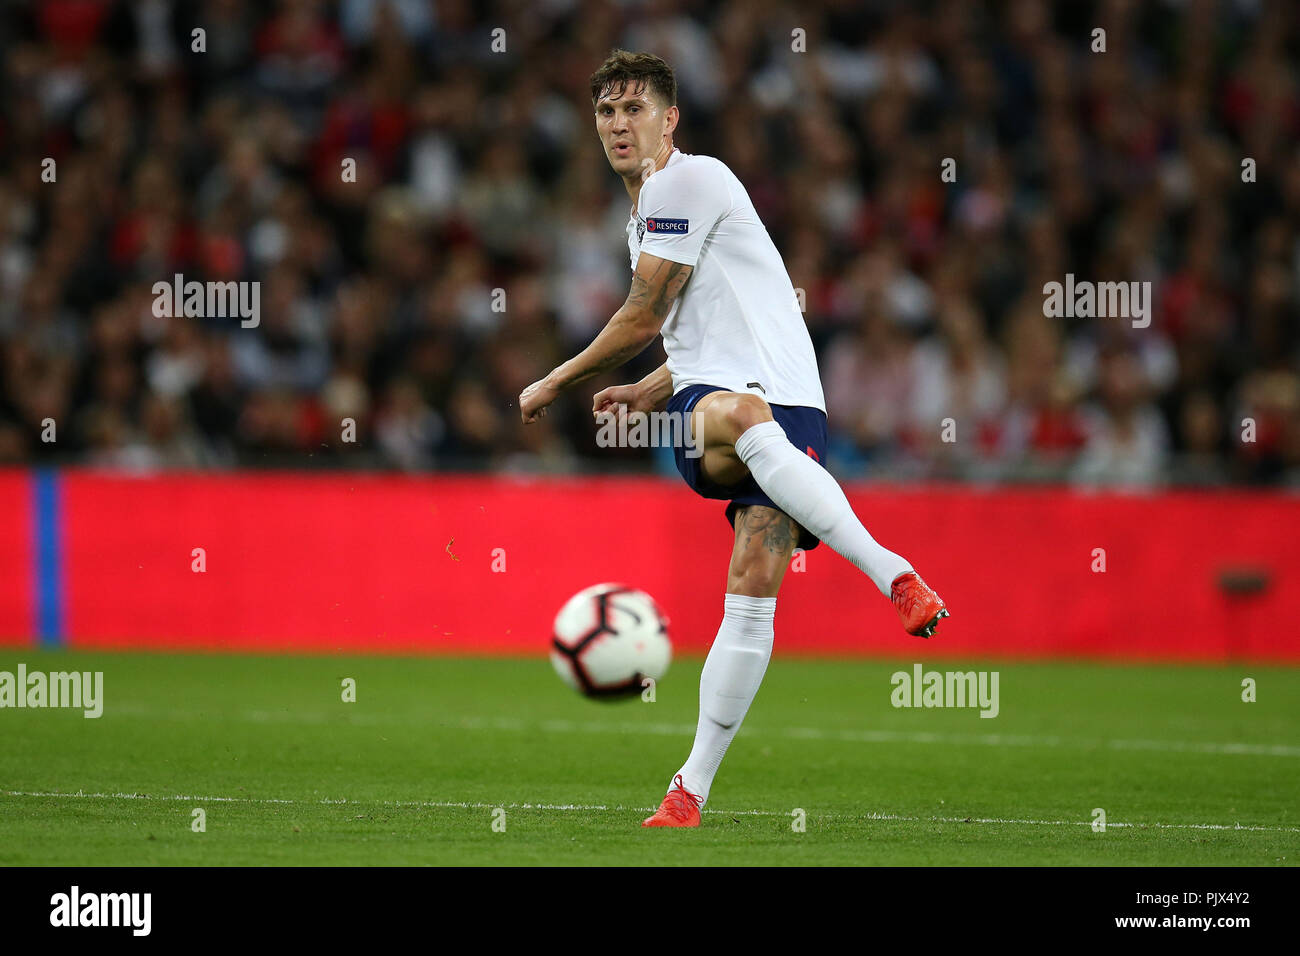 London, UK. 08th Sep, 2018. John Stones of England in action. UEFA Nations league A, group 4 match, England v Spain at Wembley Stadium in London on Saturday 8th September 2018.  Please note images are for Editorial Use Only. pic by Andrew Orchard/Alamy Live news Credit: Andrew Orchard sports photography/Alamy Live News Stock Photo